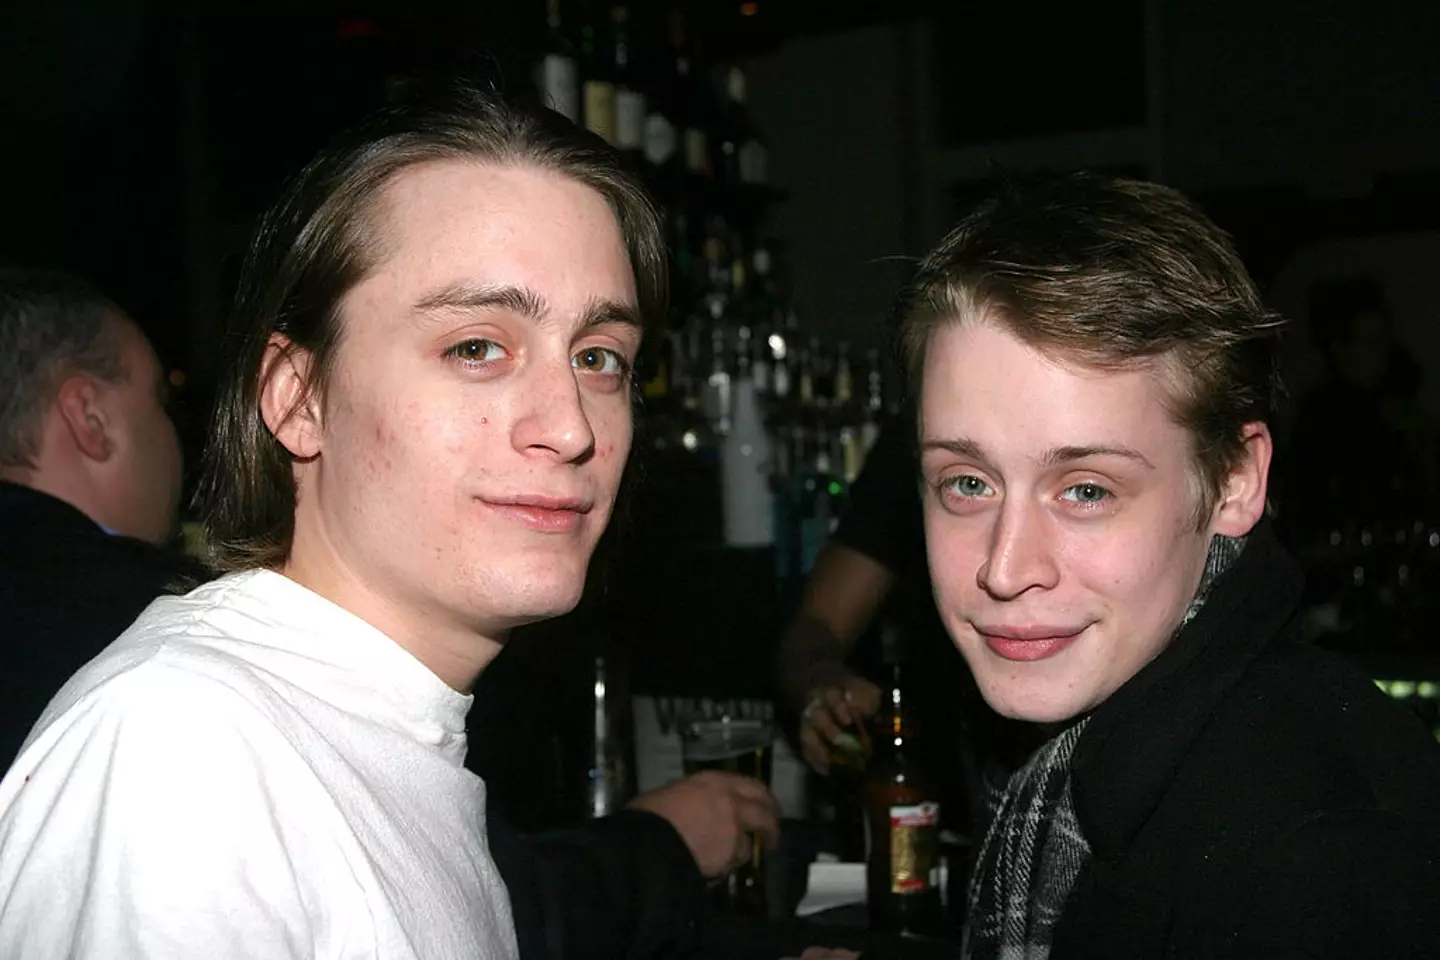 Succession fans are ‘mind-blown’ after realising star Kieran Culkin featured in Home Alone alongside his older brother Macaulay.